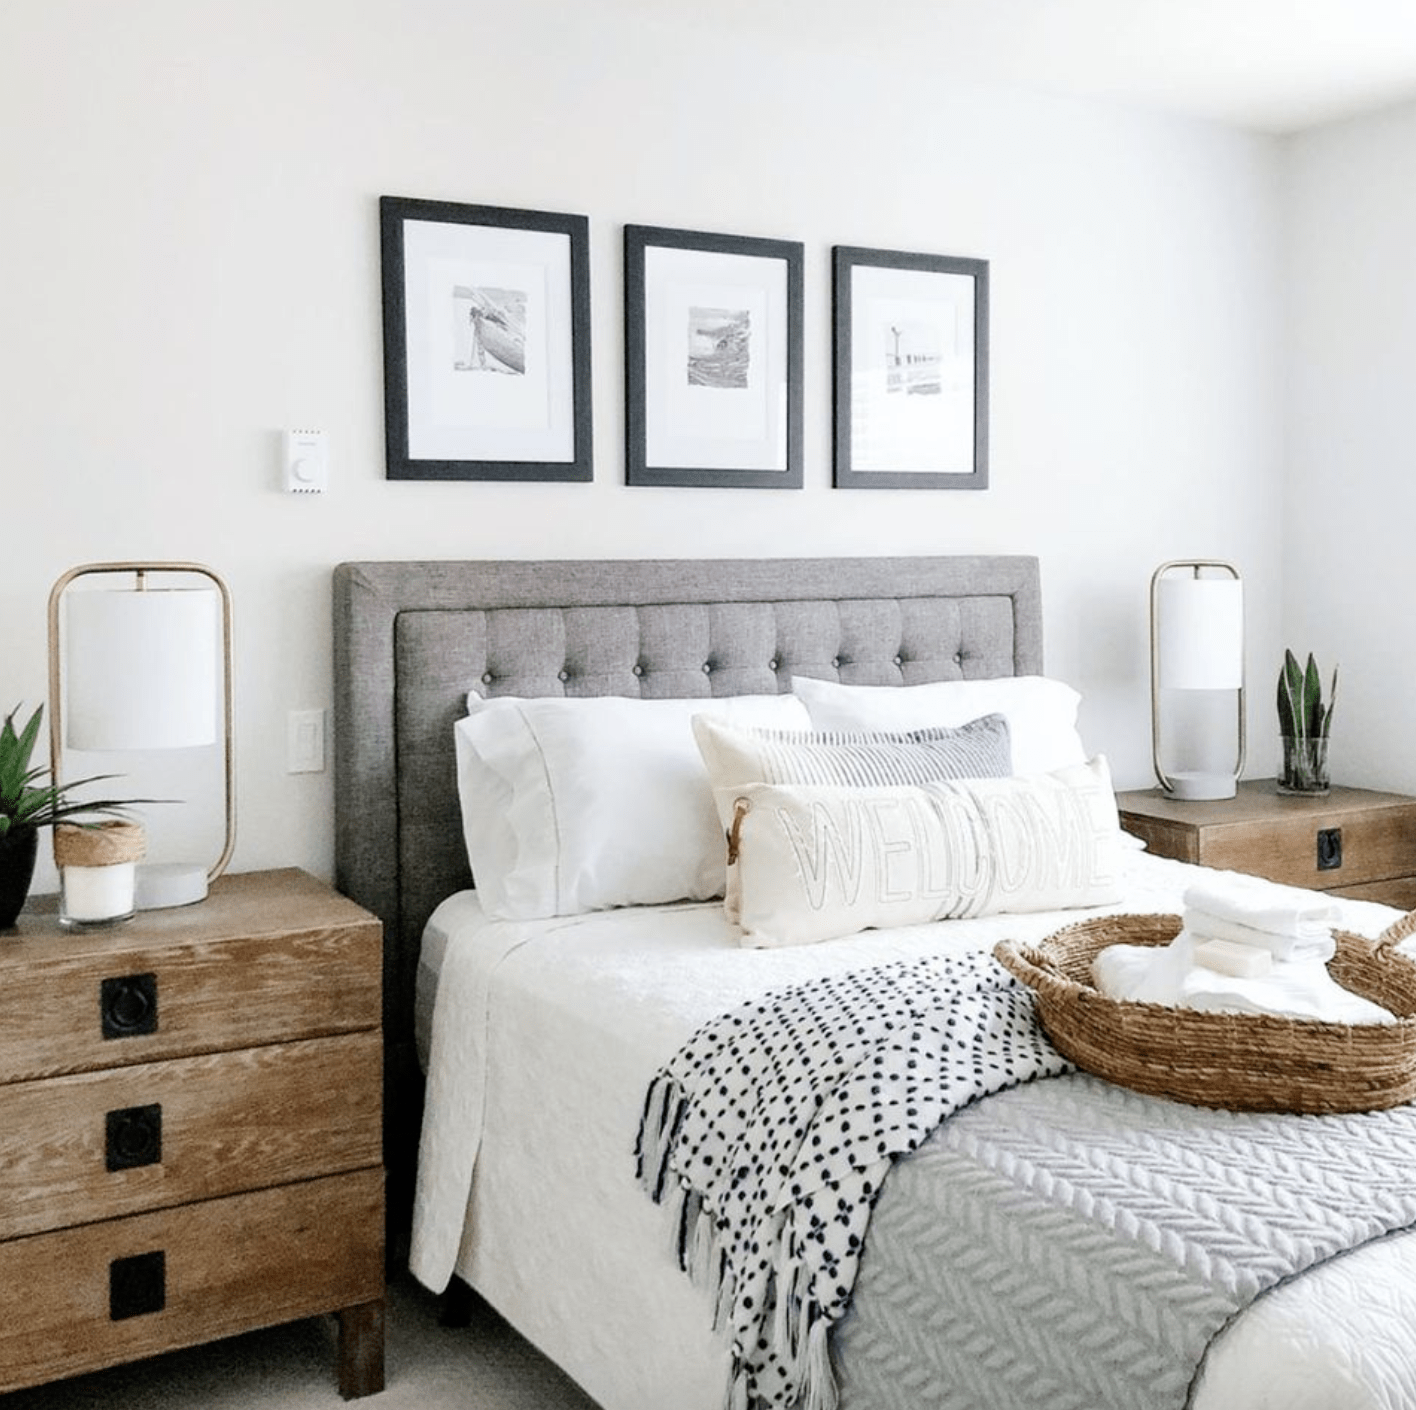 All The Best Bedroom Colors for Every Mood (2020)